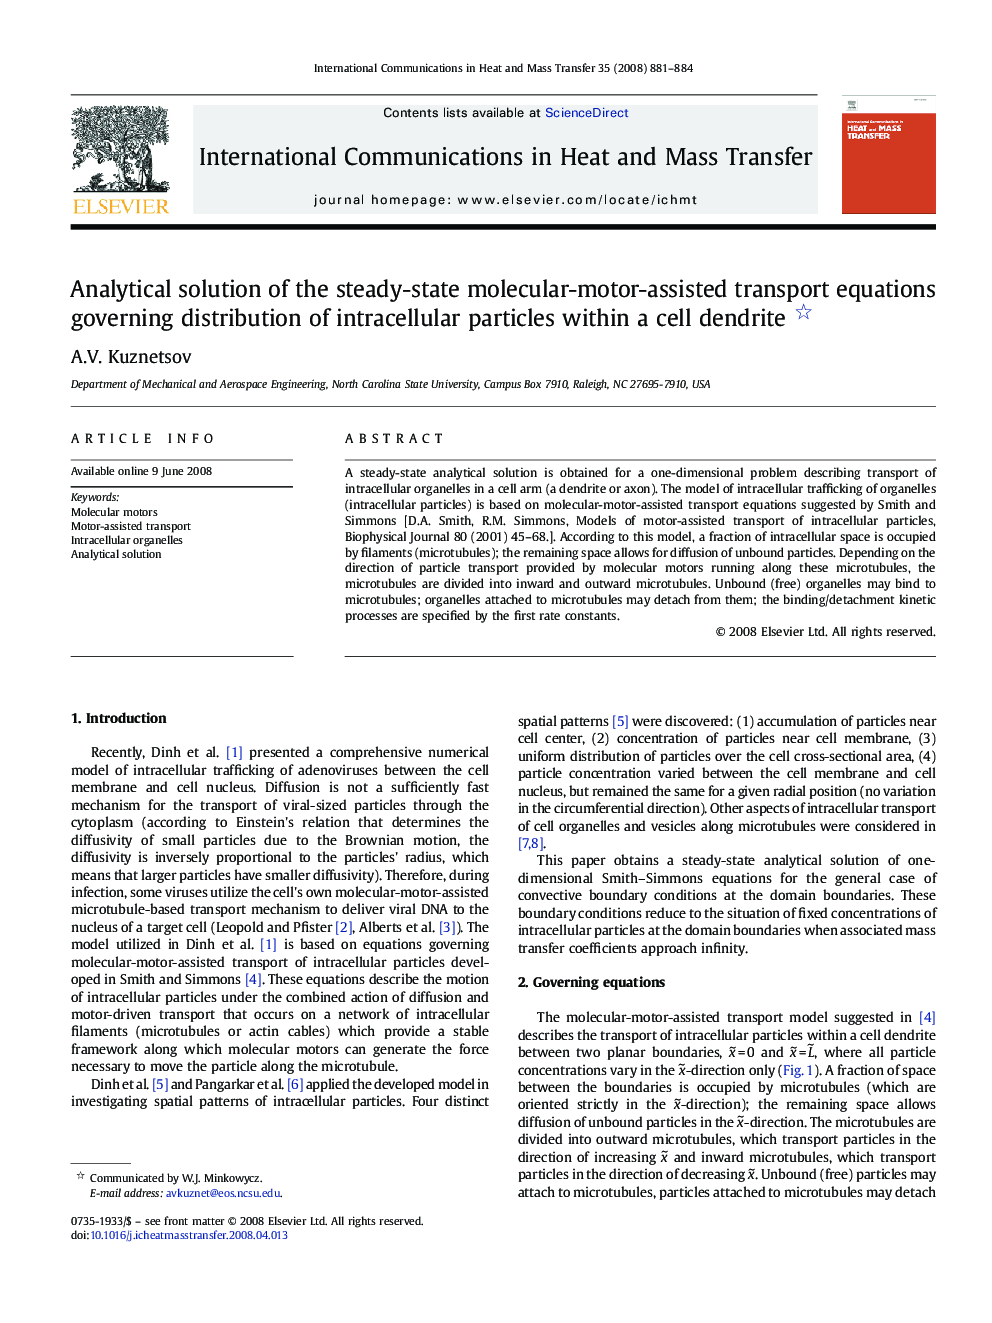 Analytical solution of the steady-state molecular-motor-assisted transport equations governing distribution of intracellular particles within a cell dendrite